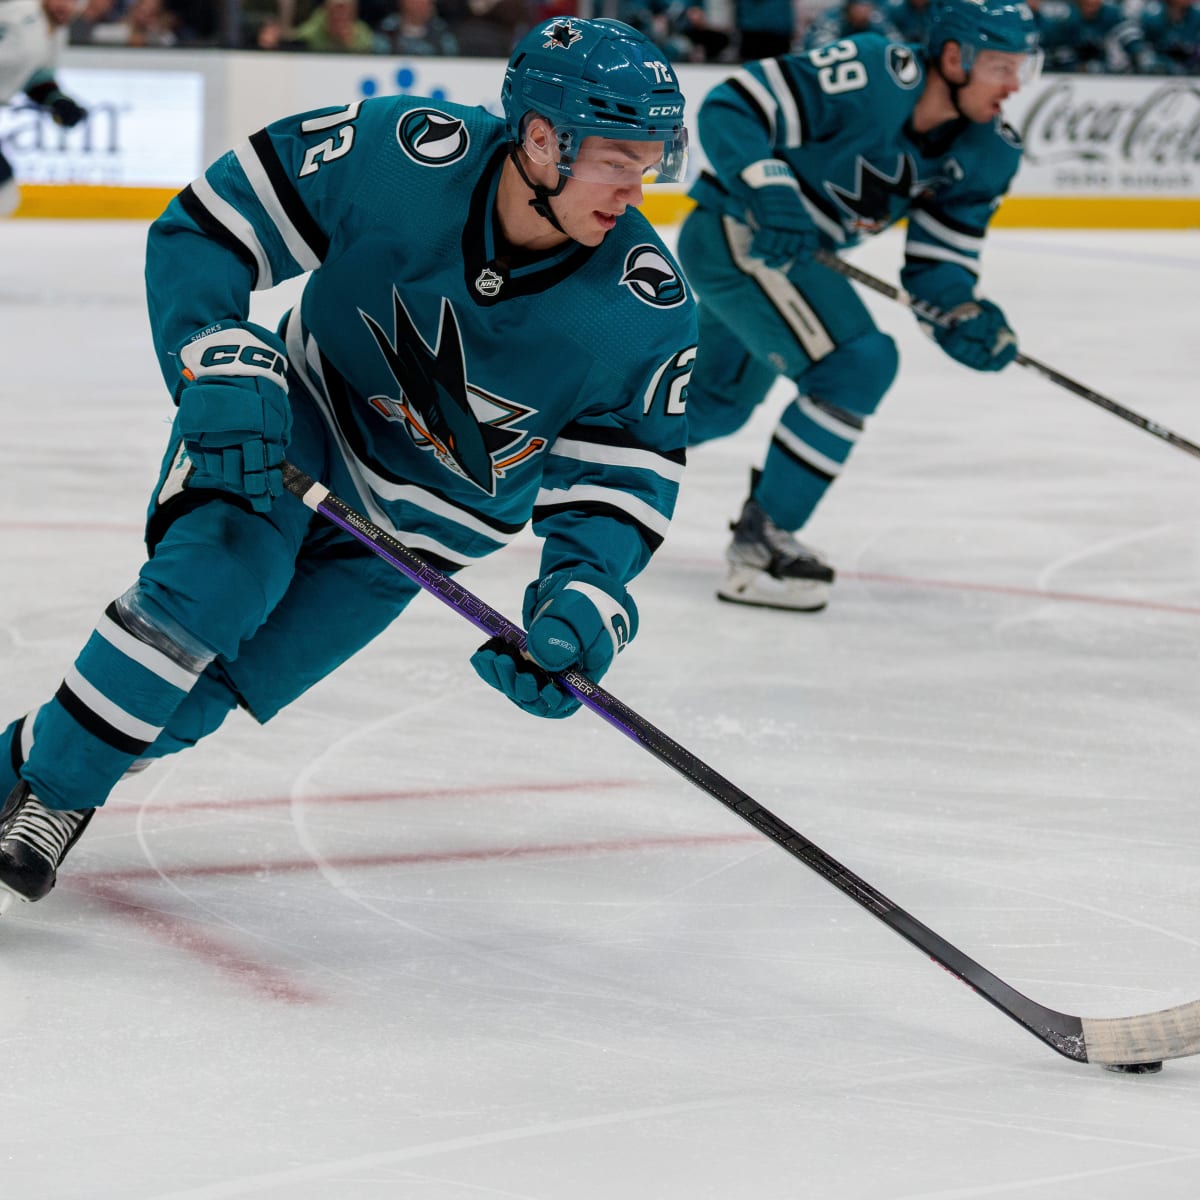 BREAKING: Eklund Signs with Sharks, Willing to Play in AHL